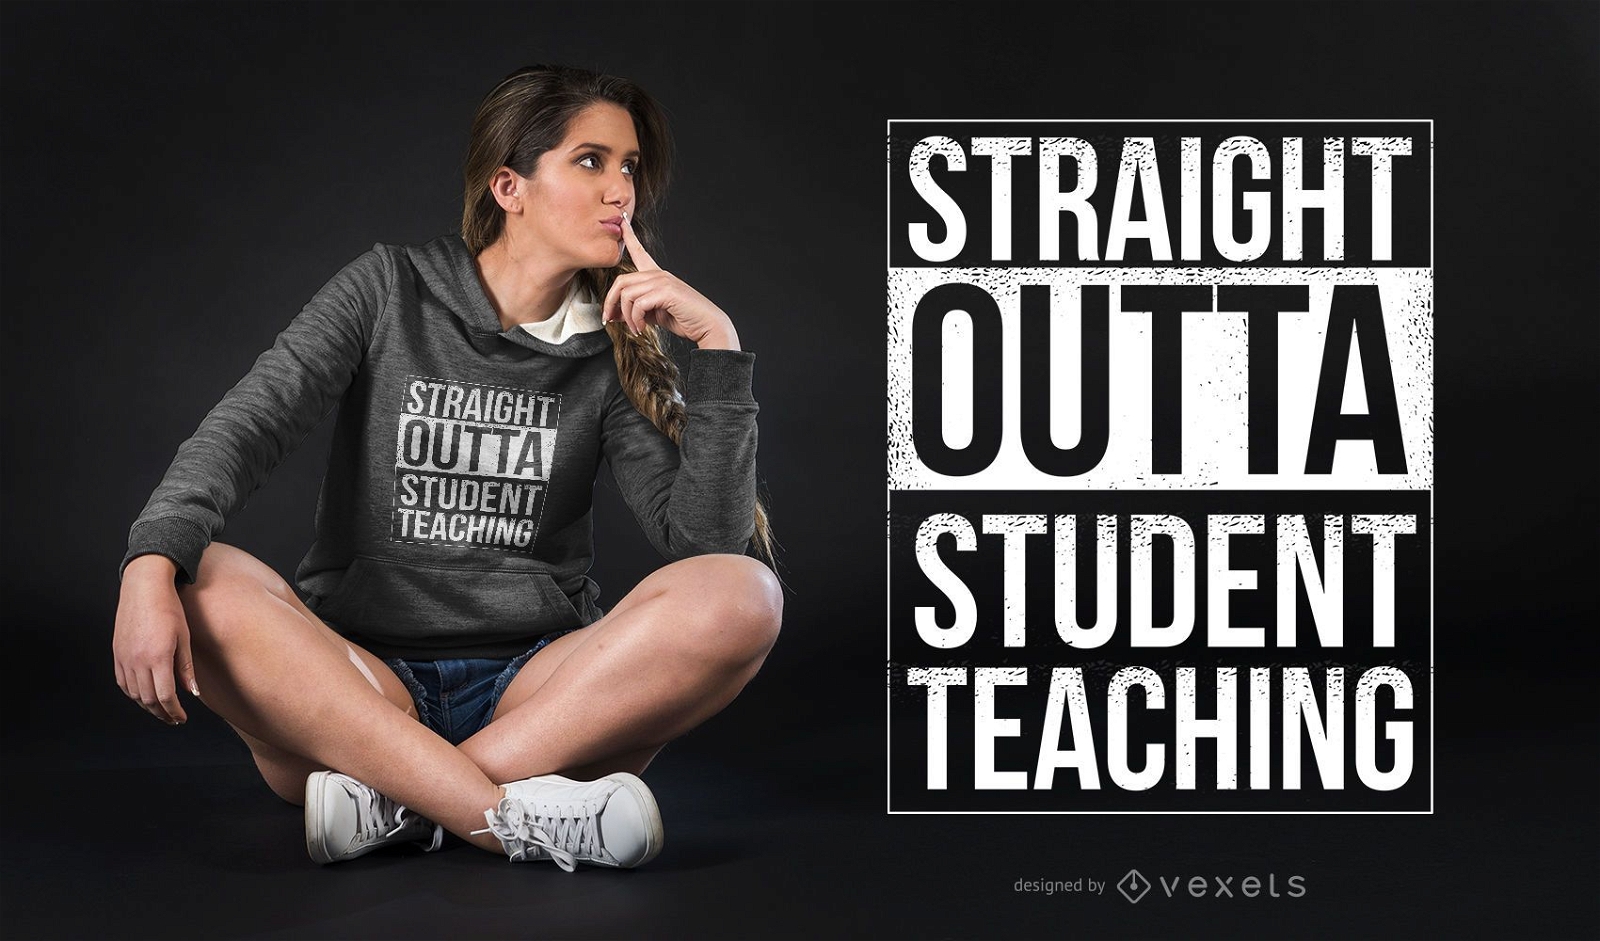 Gerade Outta Student Teaching Funny Quote Parodie T-Shirt Design